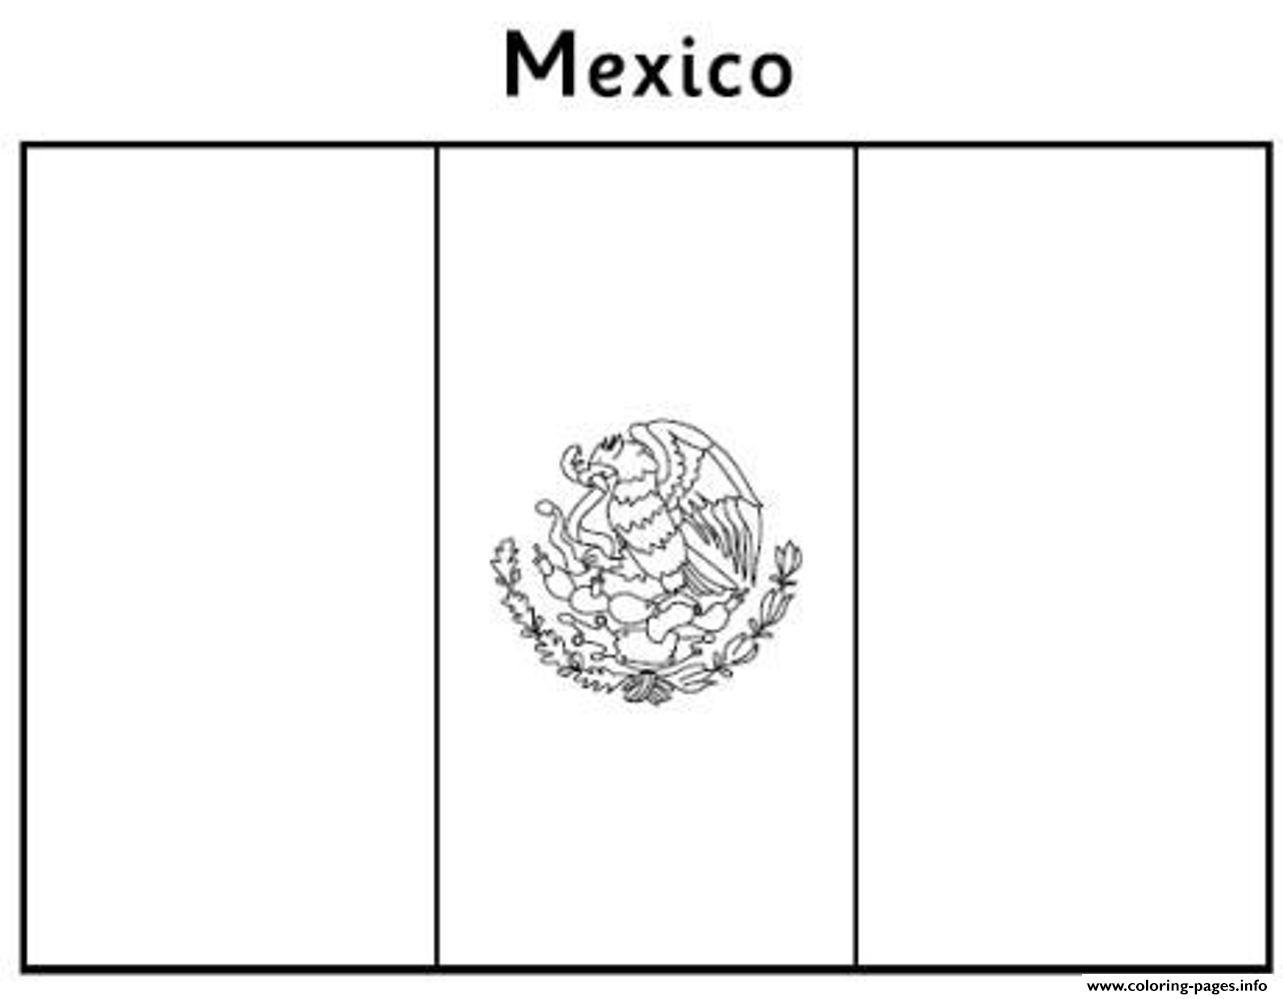 Print free mexican flag e357 Coloring pages